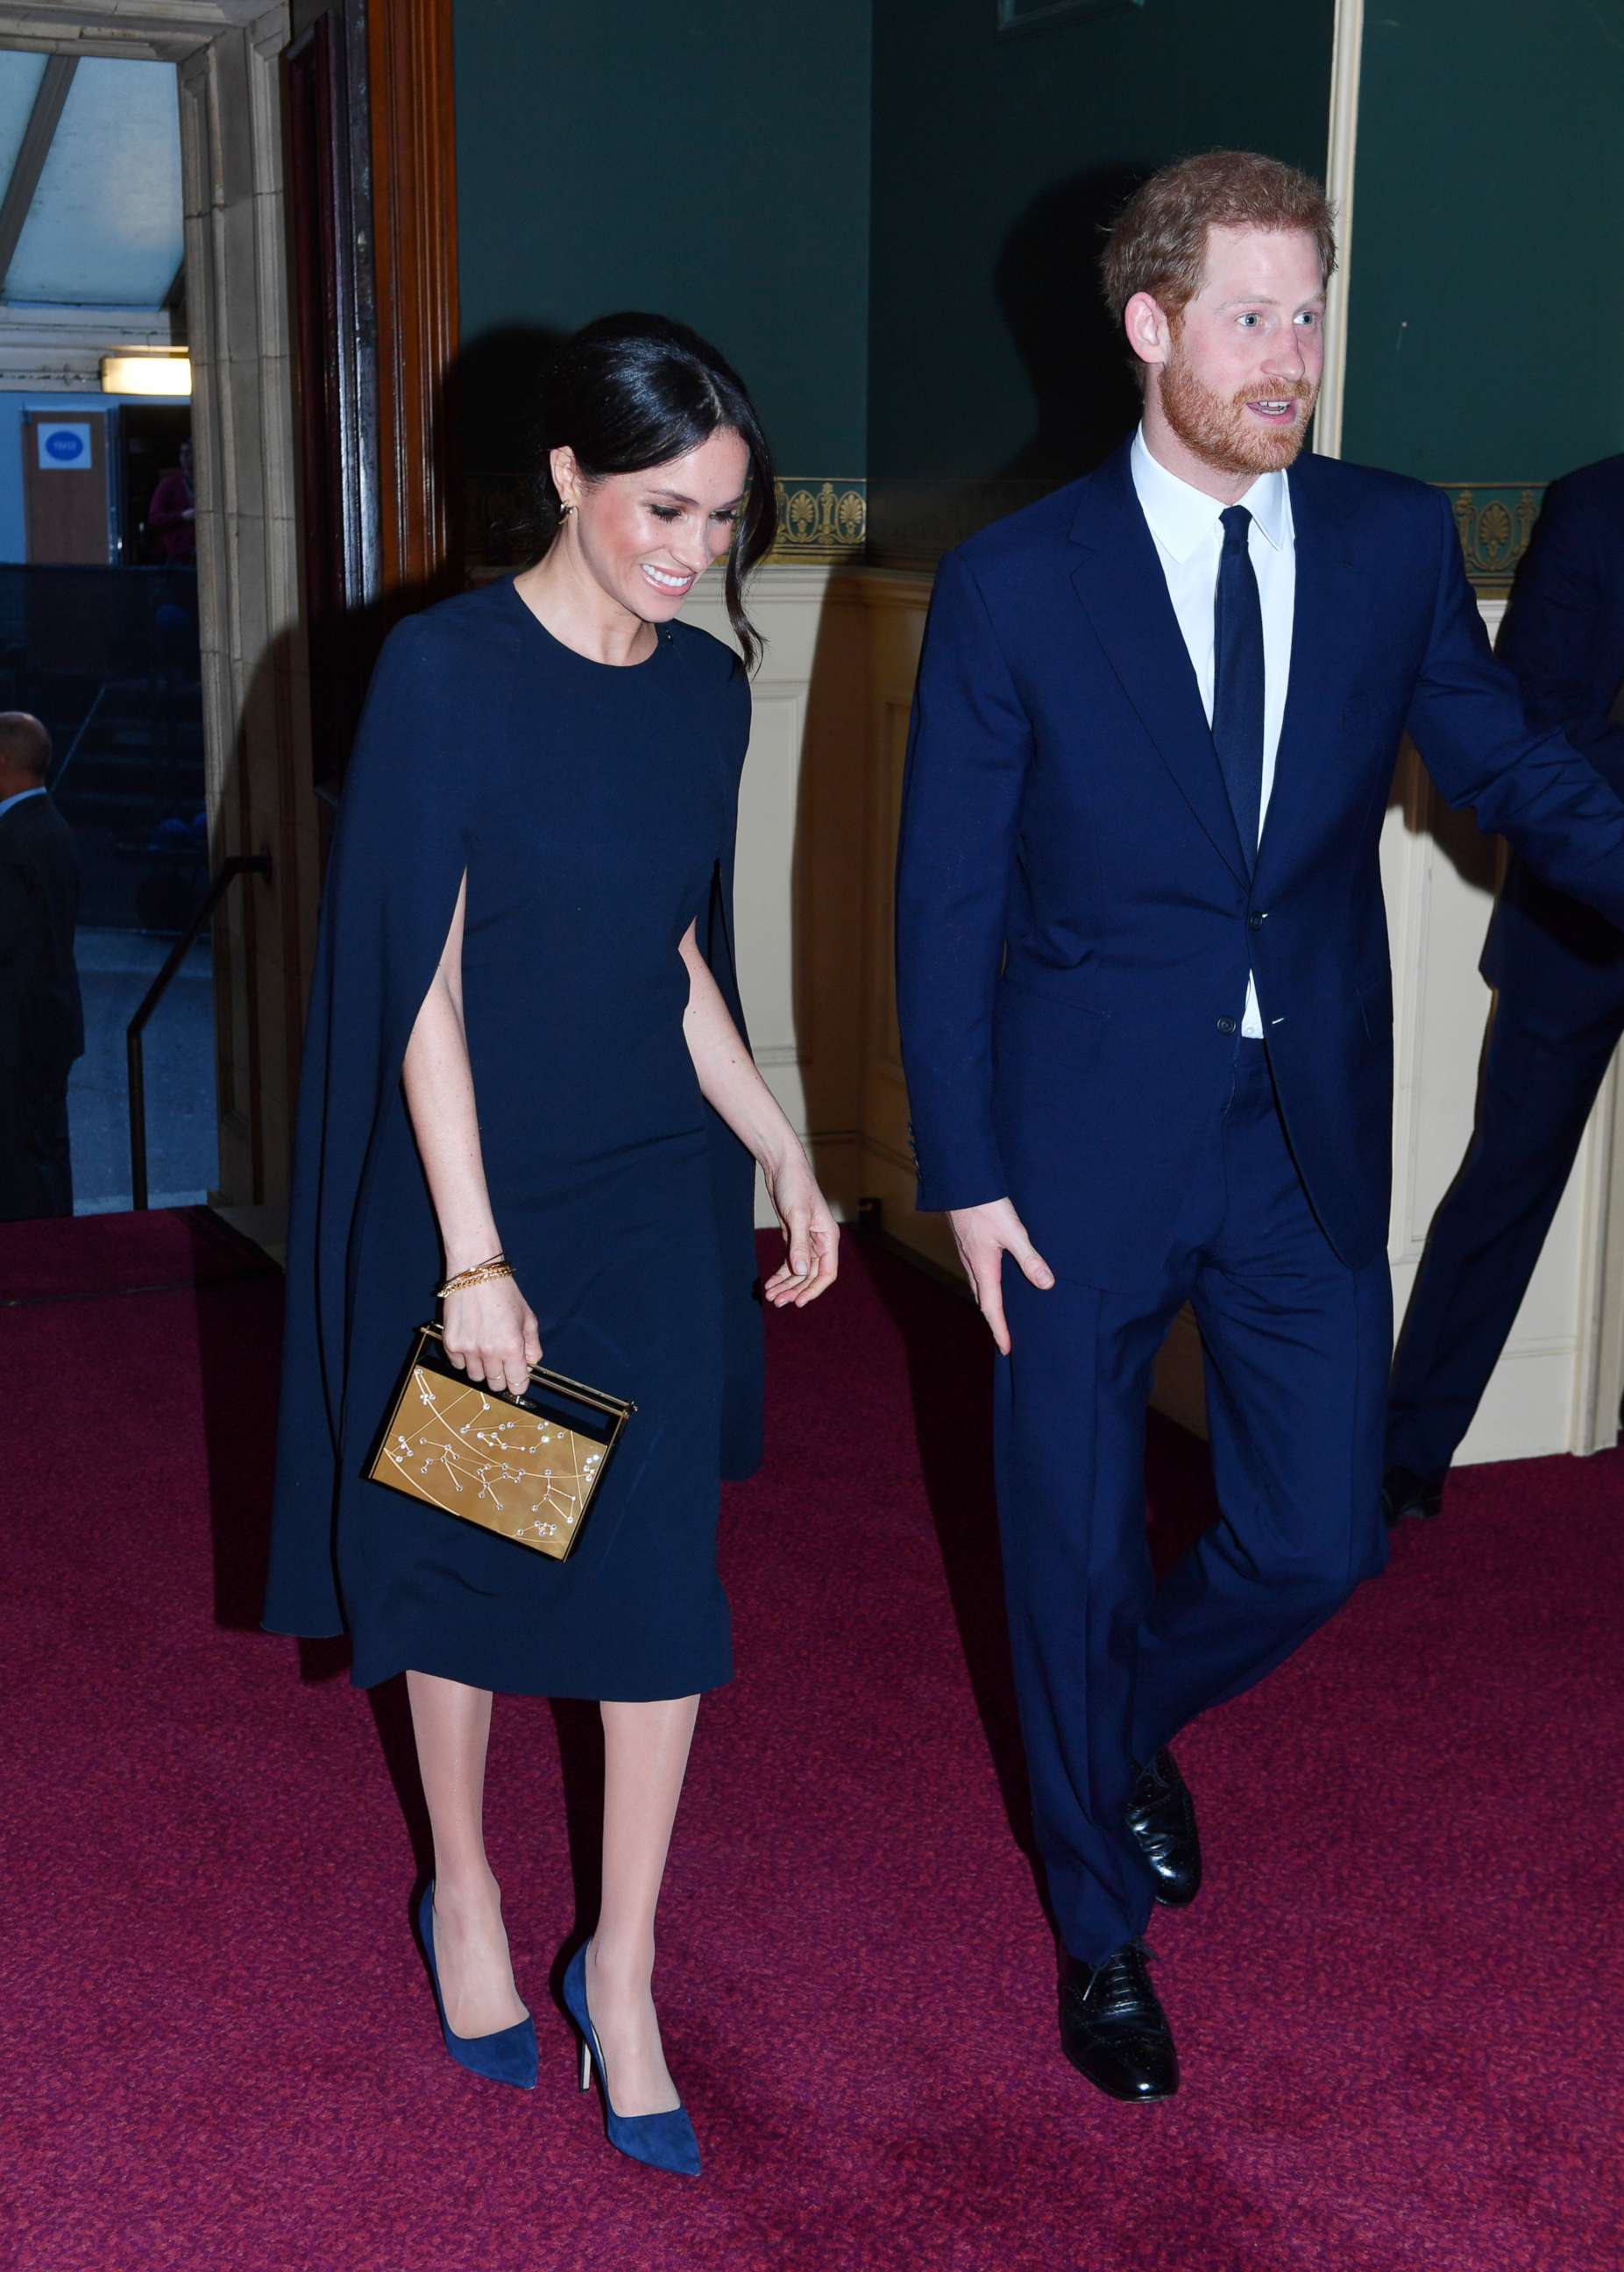 PHOTO: Prince Harry and Meghan Markle arrive at the Royal Albert Hall to attend a star-studded concert to celebrate the Queen's 92nd birthday in London, April 21, 2018.